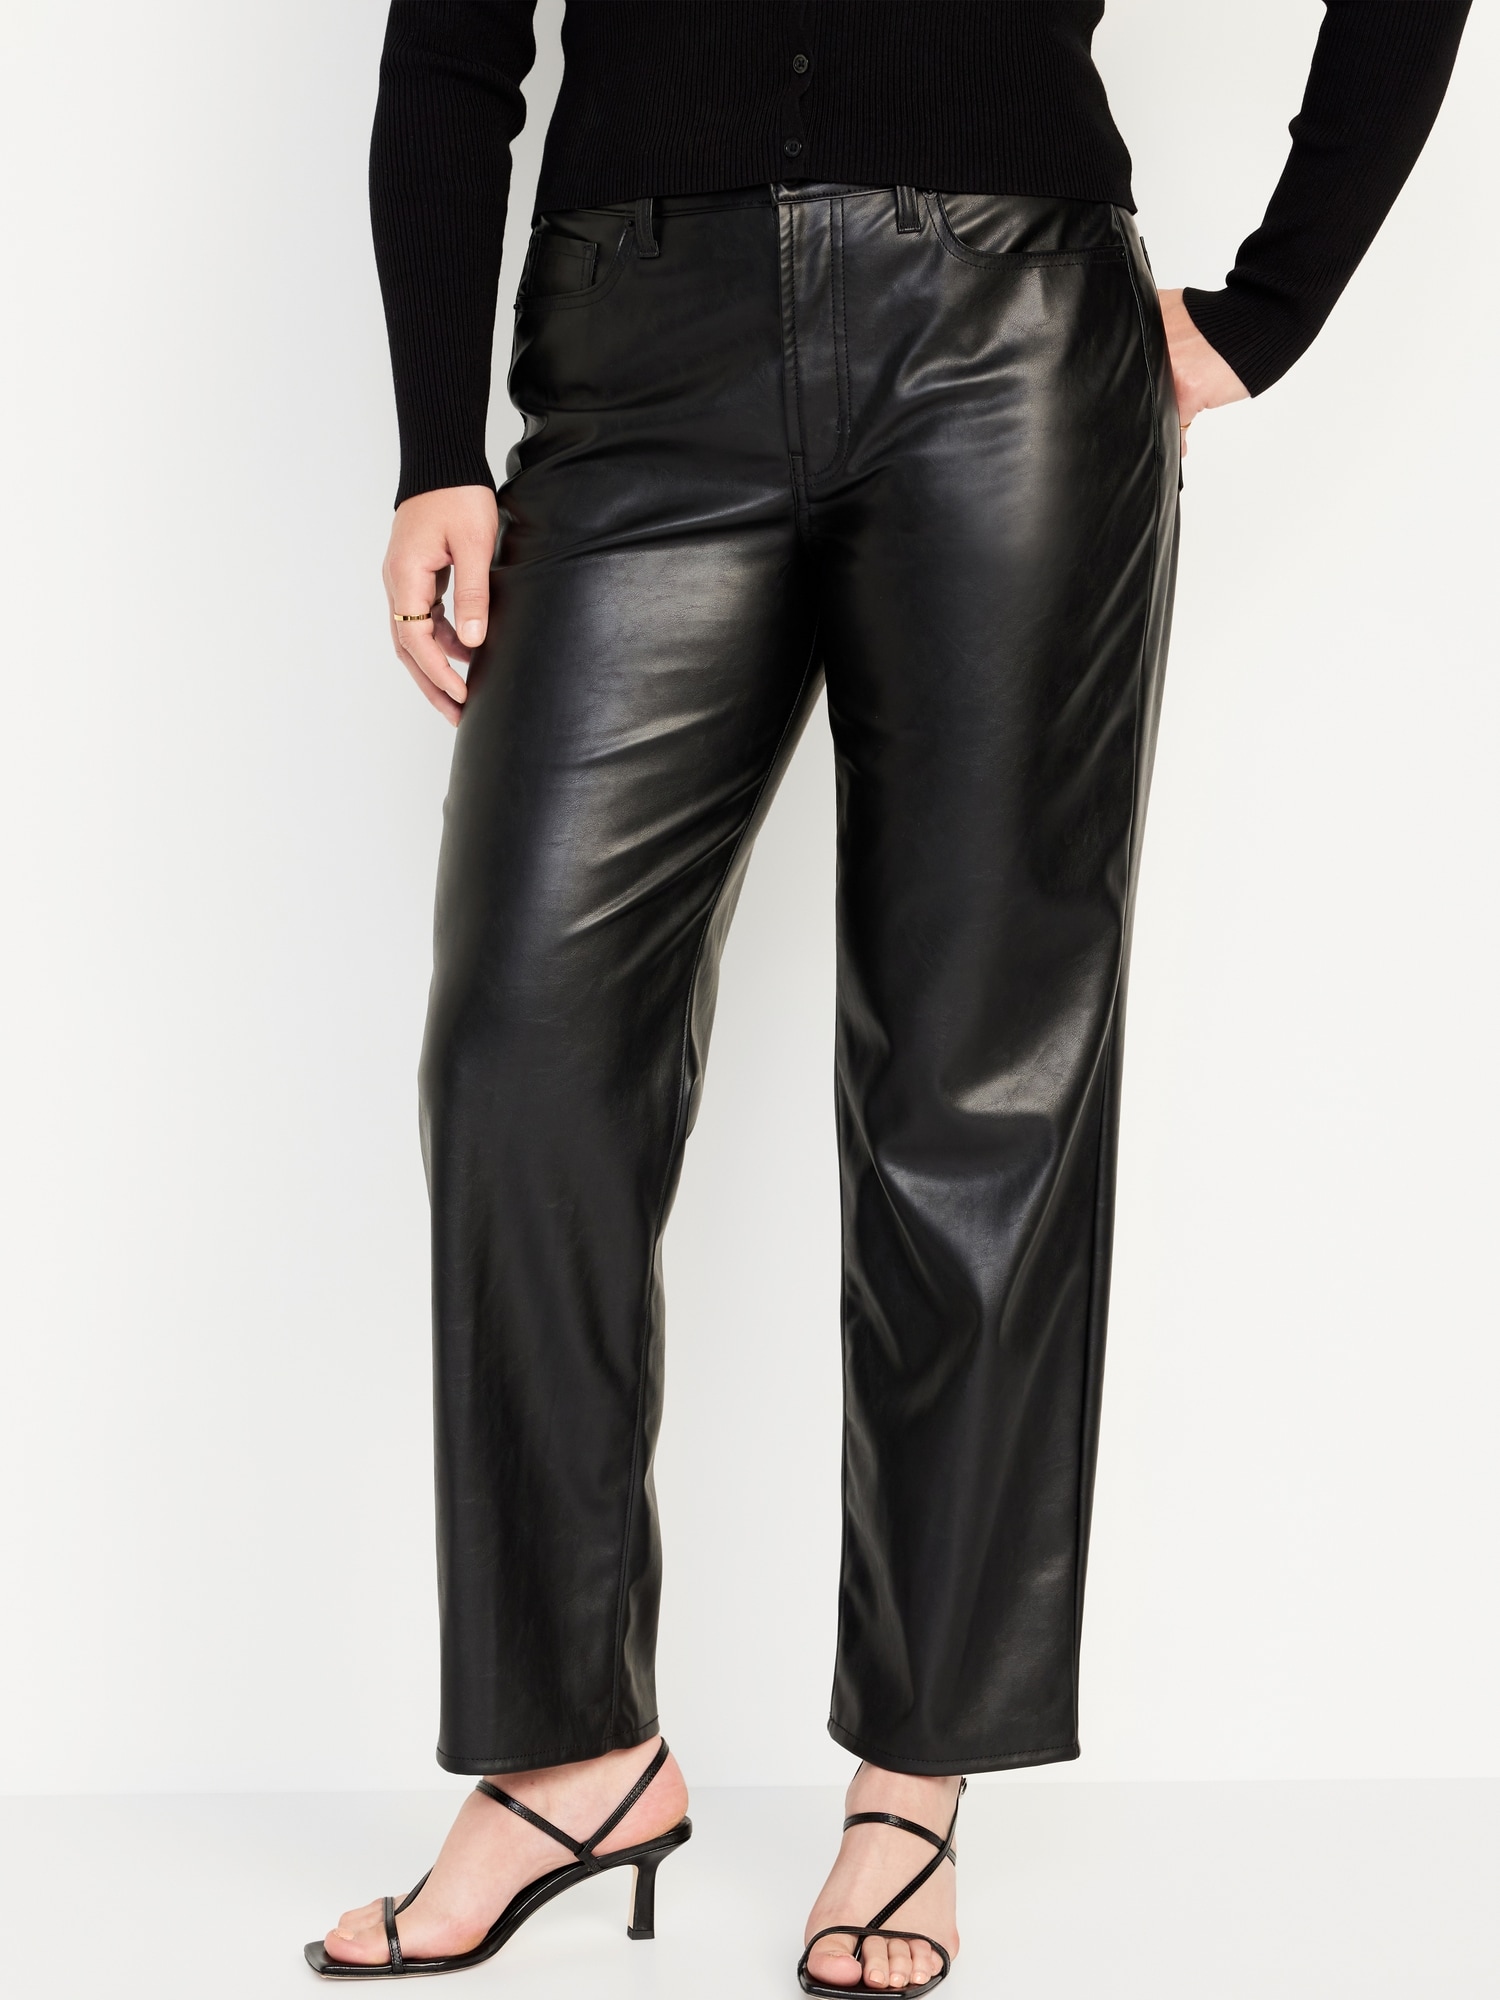 Express Express Womens 8 Black High Waisted Faux Leather Pants